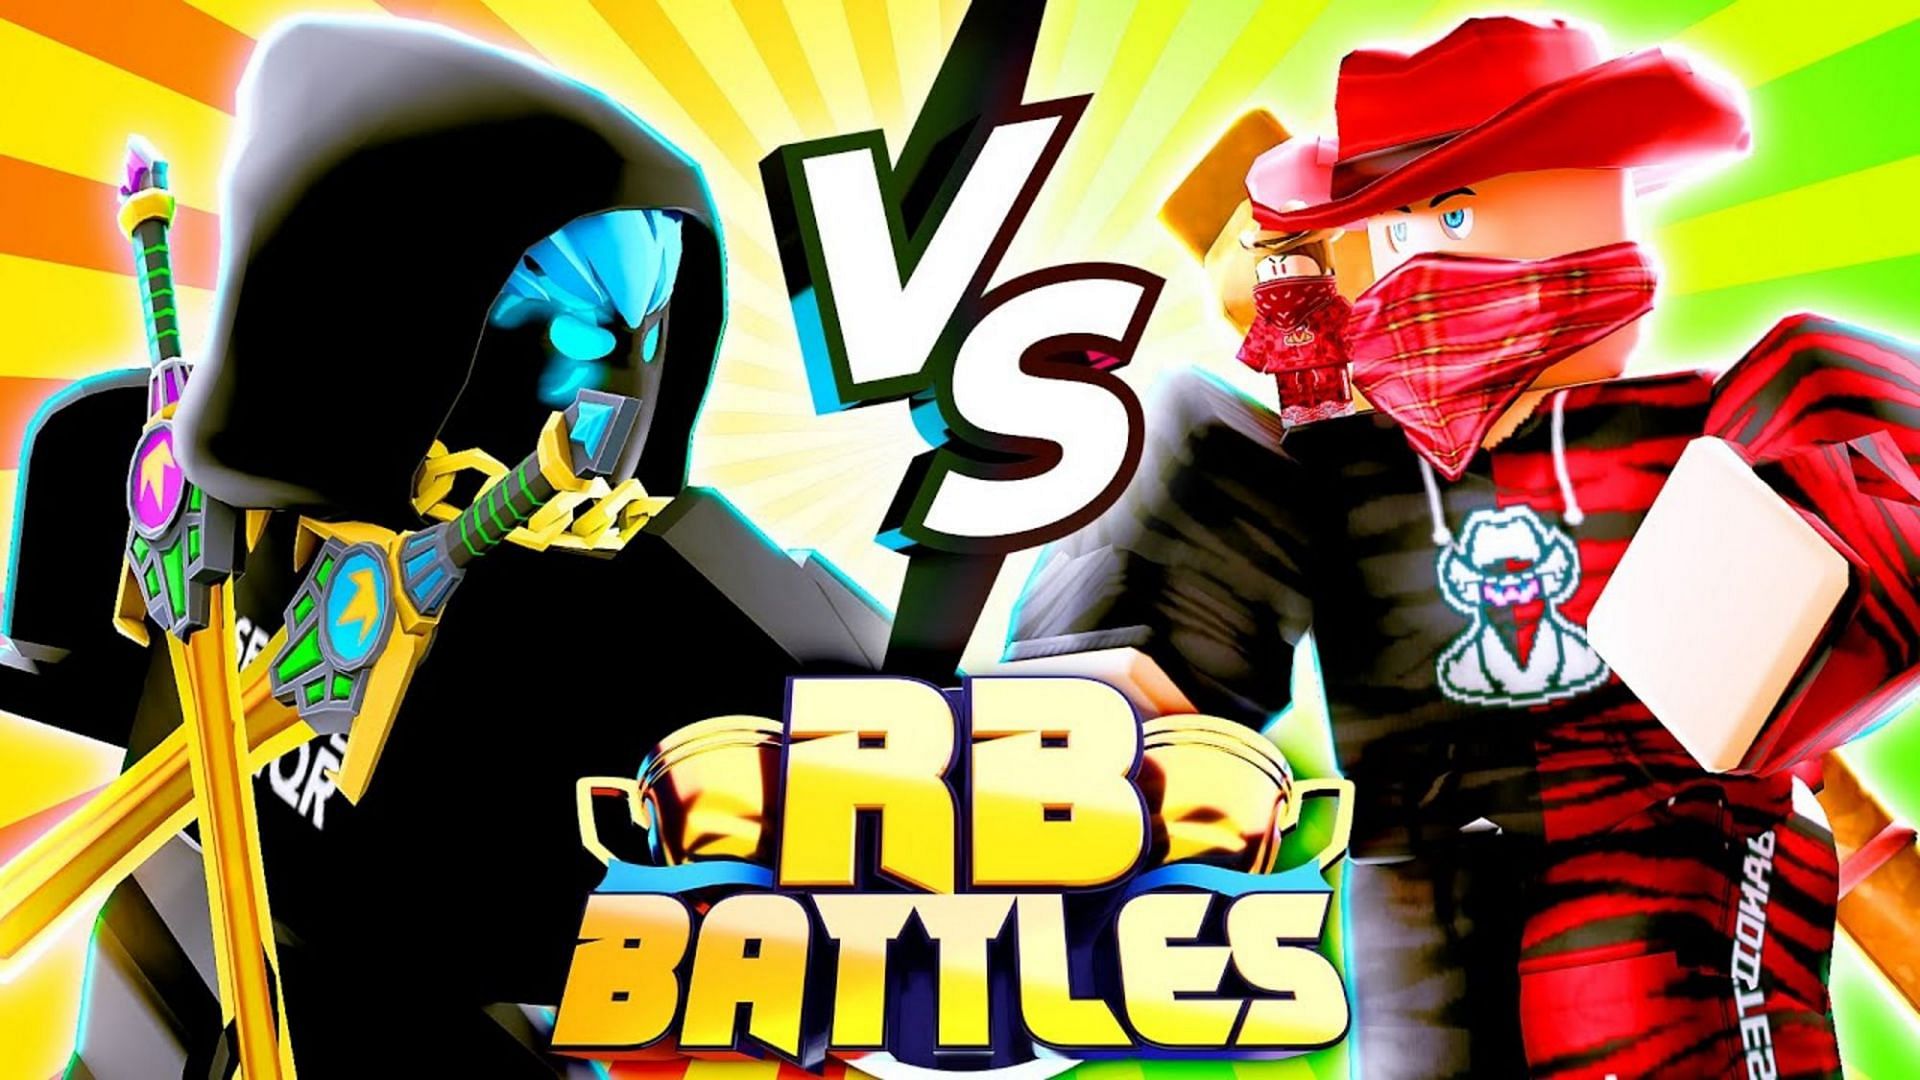 Featured image of the matchup between TanqR and Bandites (Image via Roblox Battles YouTube)